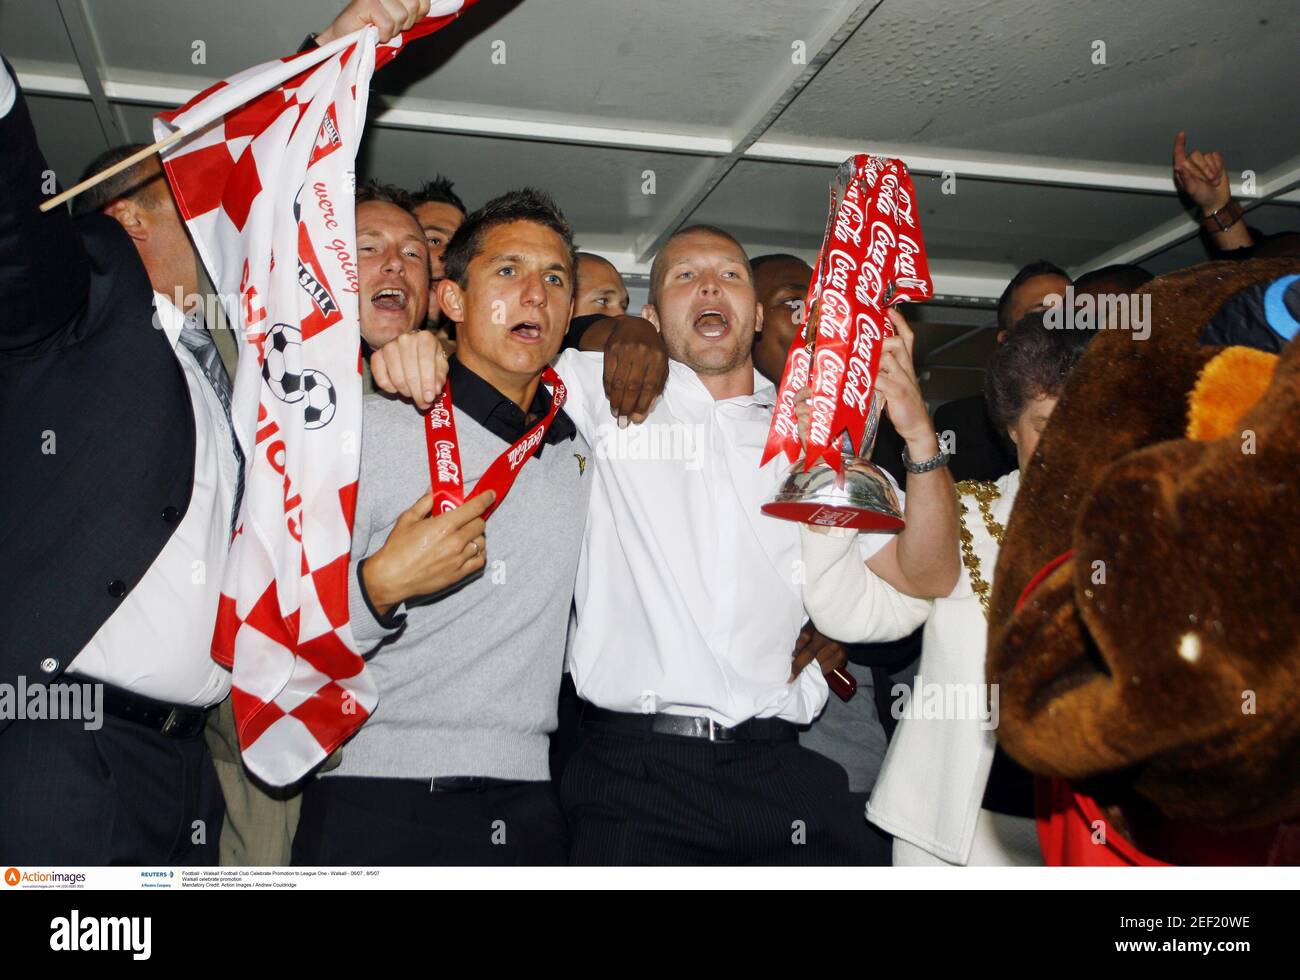 Calcio - Walsall Football Club Celebrate Promotion to League One - Walsall - 06/07 , 8/5/07 Walsall Celebrate Promotion Mandatory Credit: Action Images / Andrew Couldridge Foto Stock